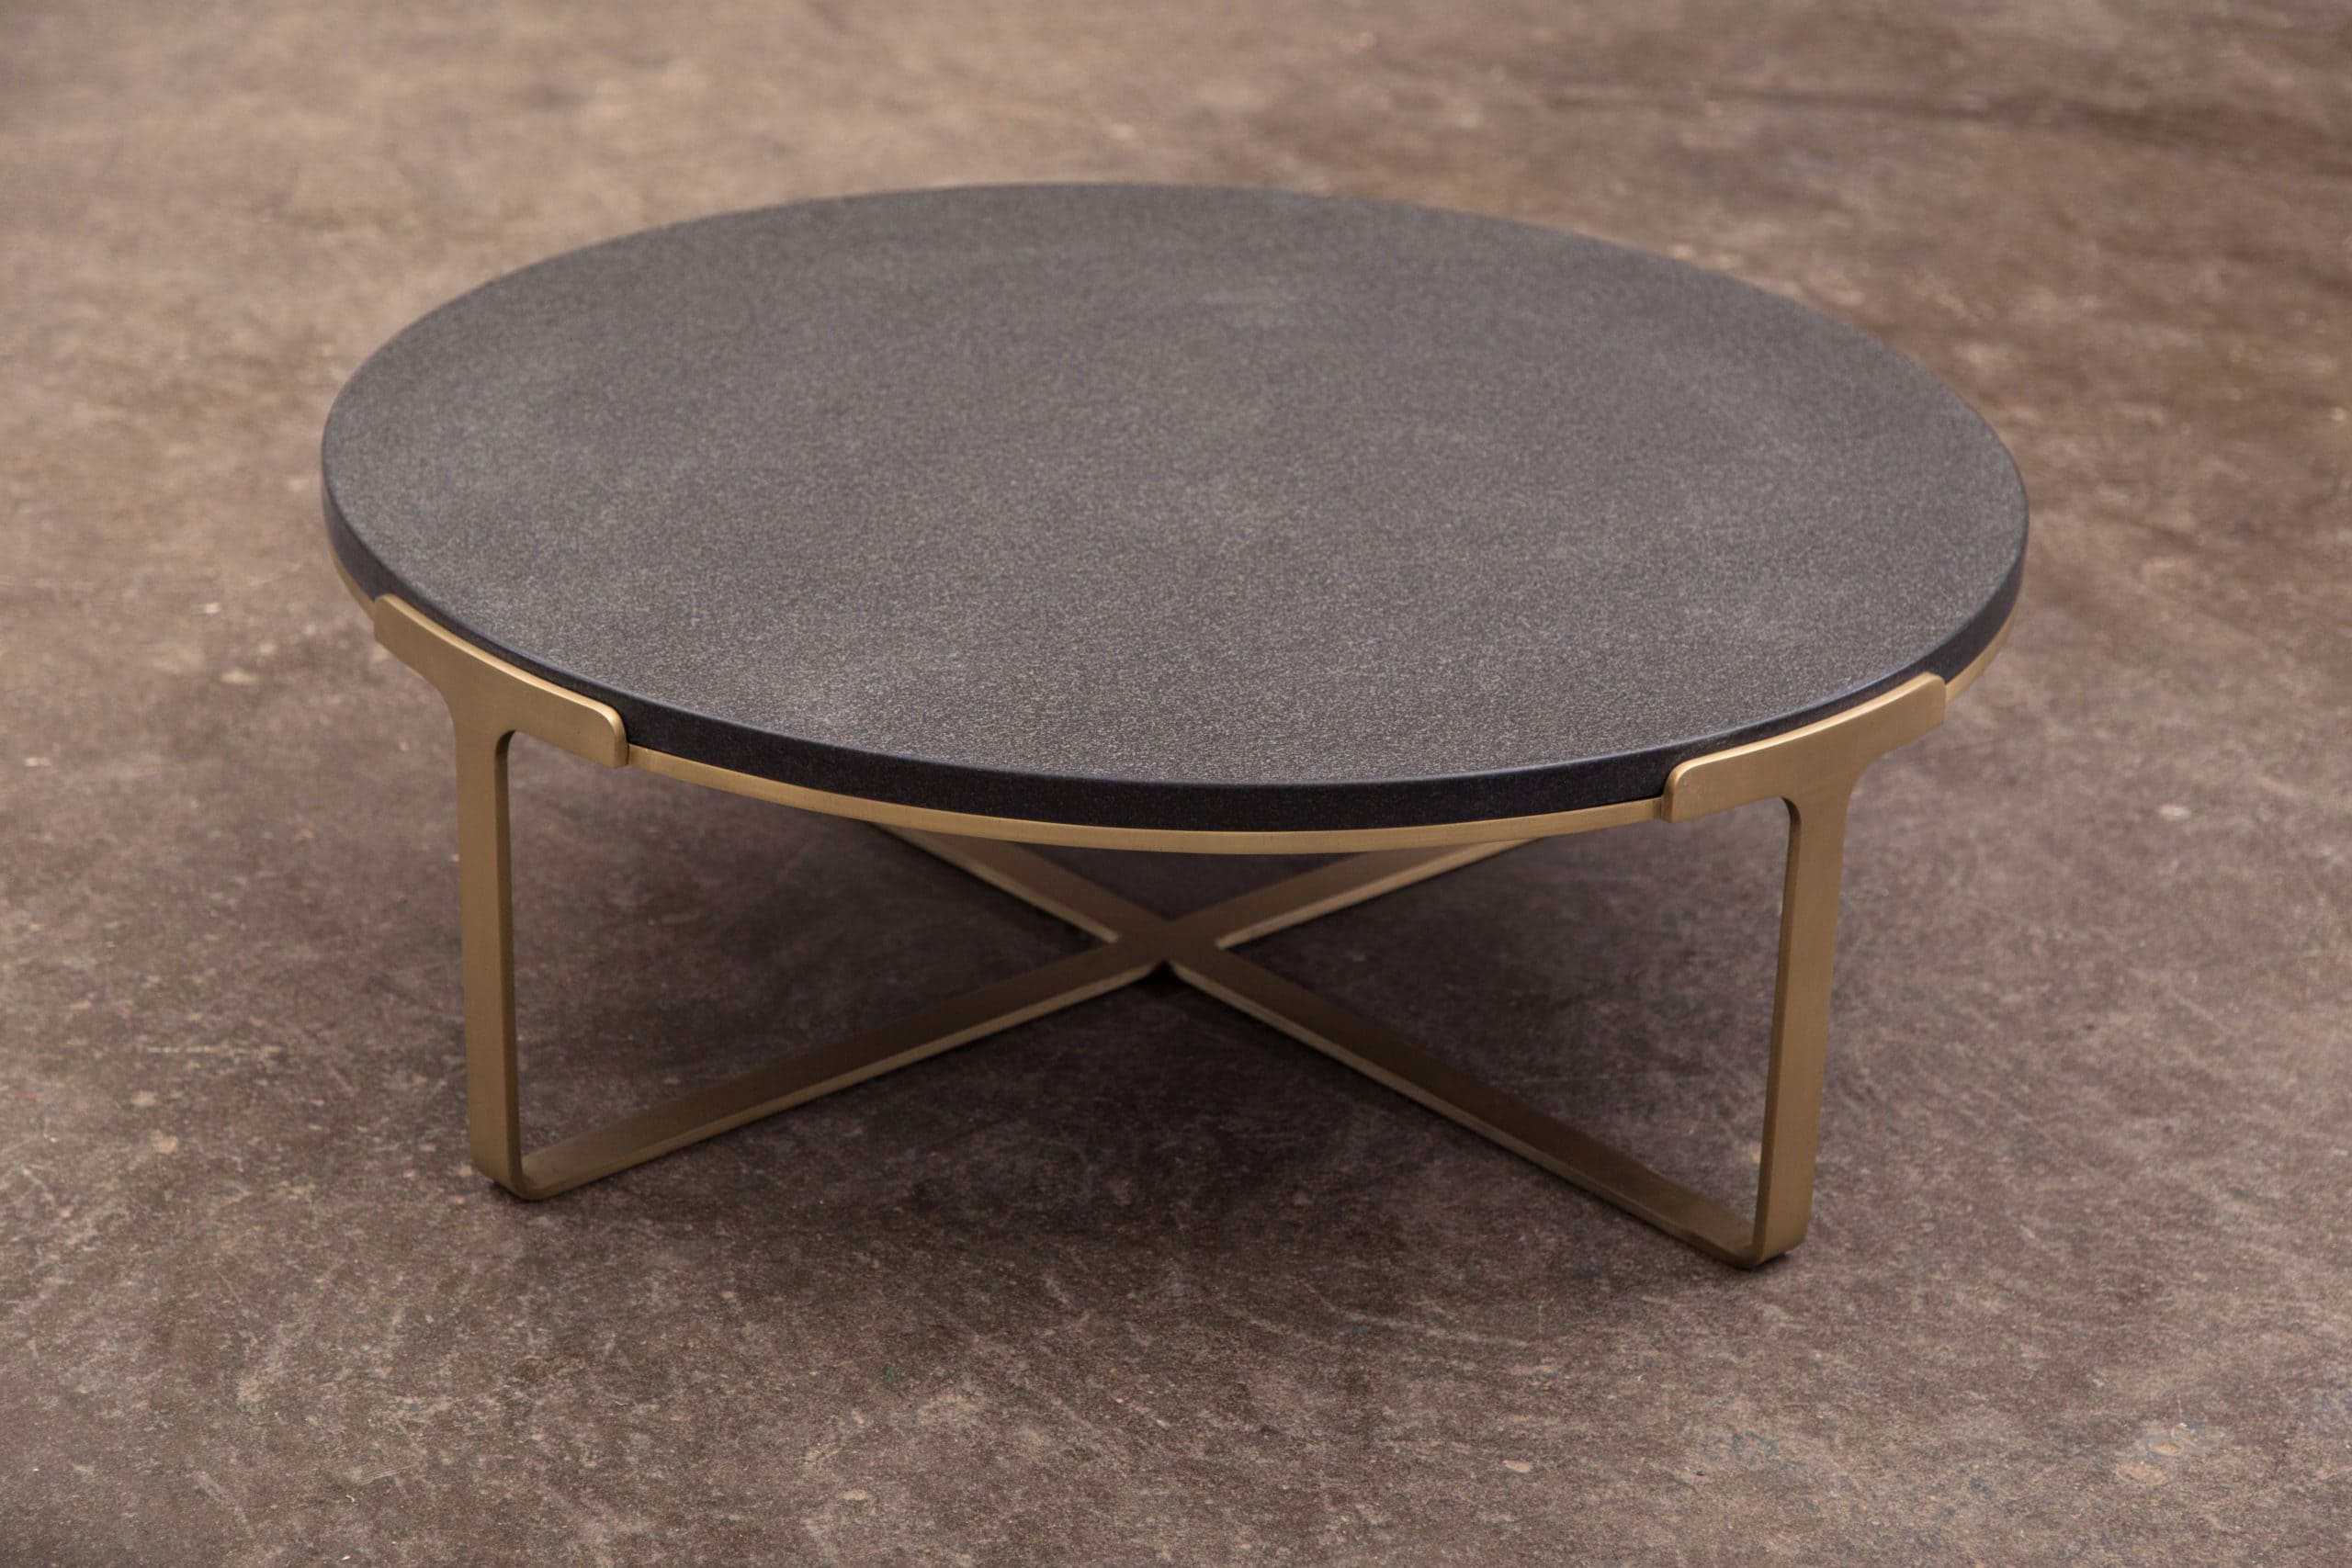 modern Coffee table design with stone and brass